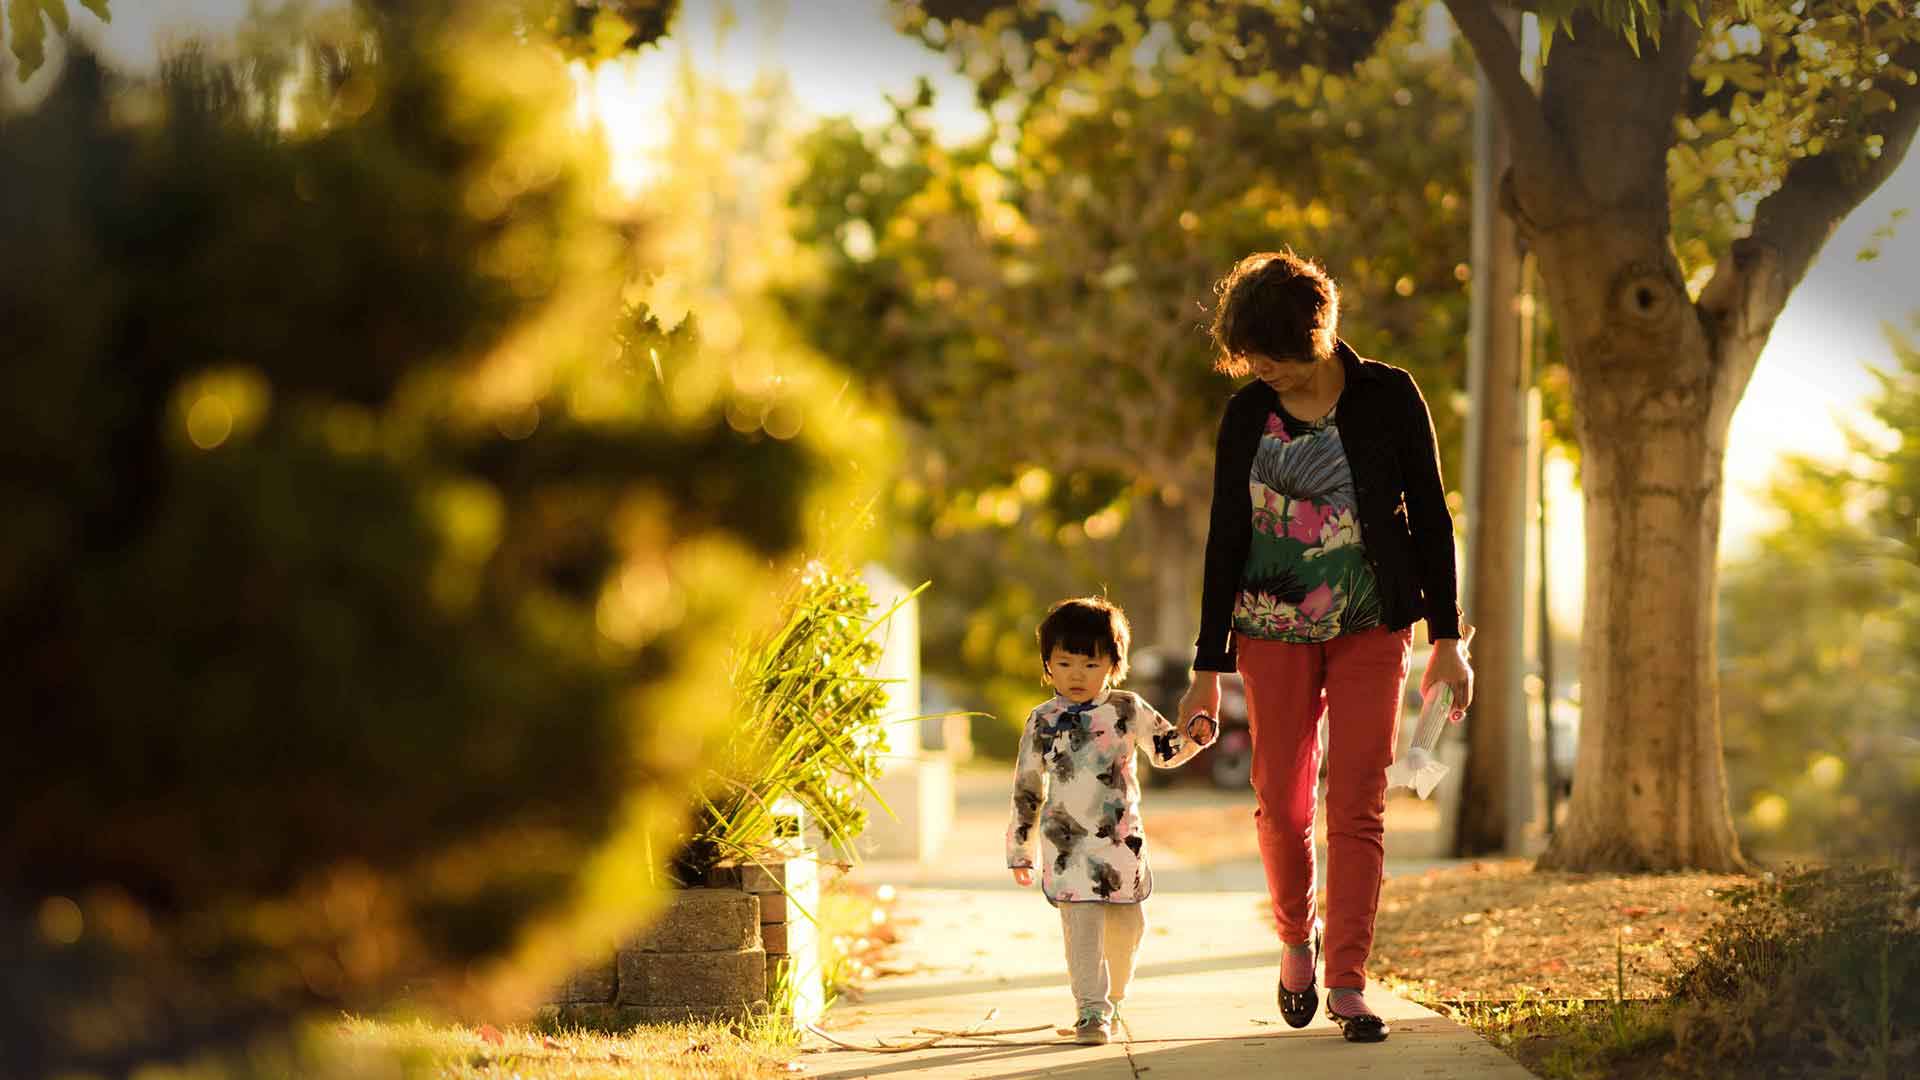 A woman holds a child's hand as they walk down the street at sunset.